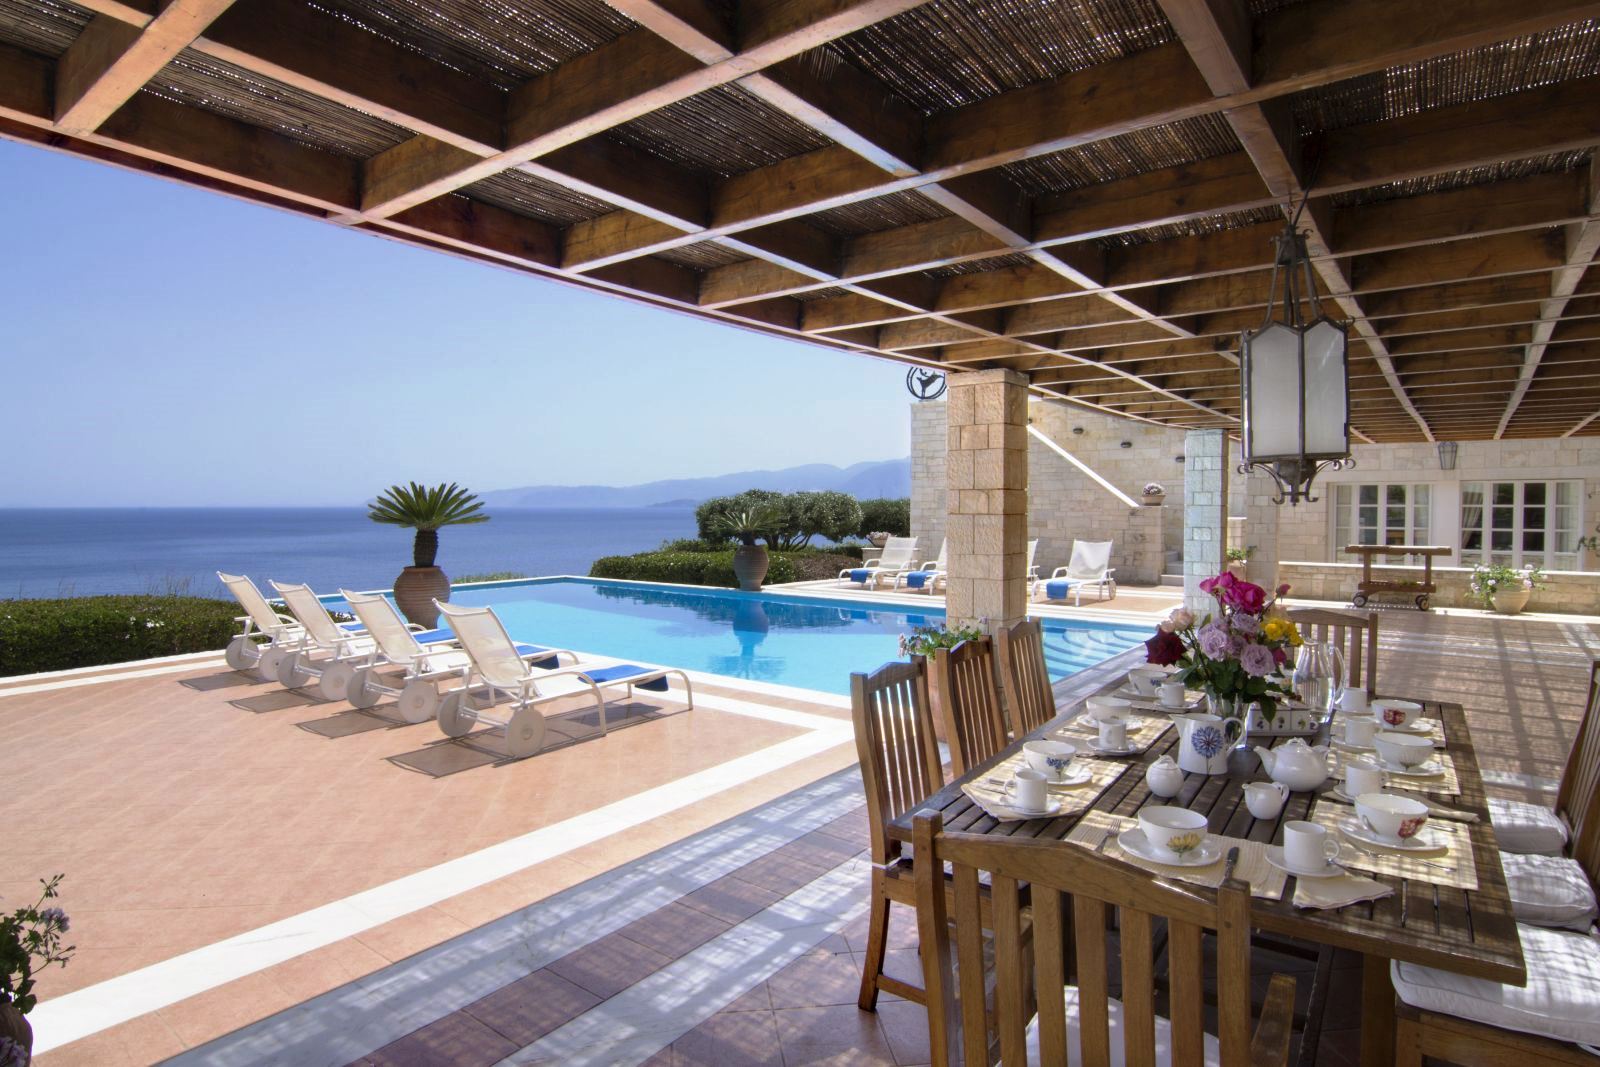 Covered terrace area with wooden table set for breakfast and chairs by the side of the pool at Villa Selene in Crete